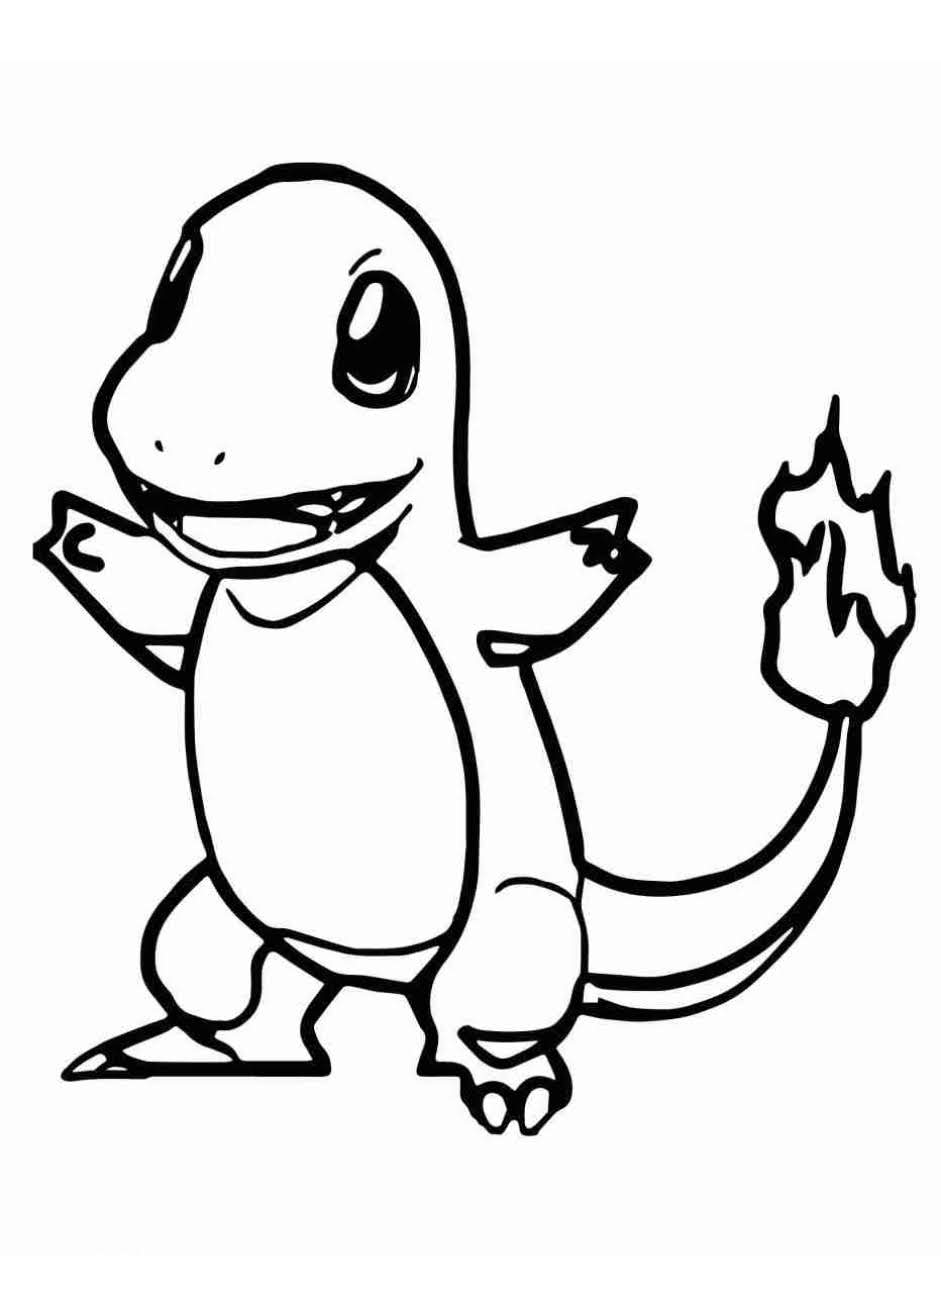 Charmander Coloring Pages - Free Pokemon Coloring Pages